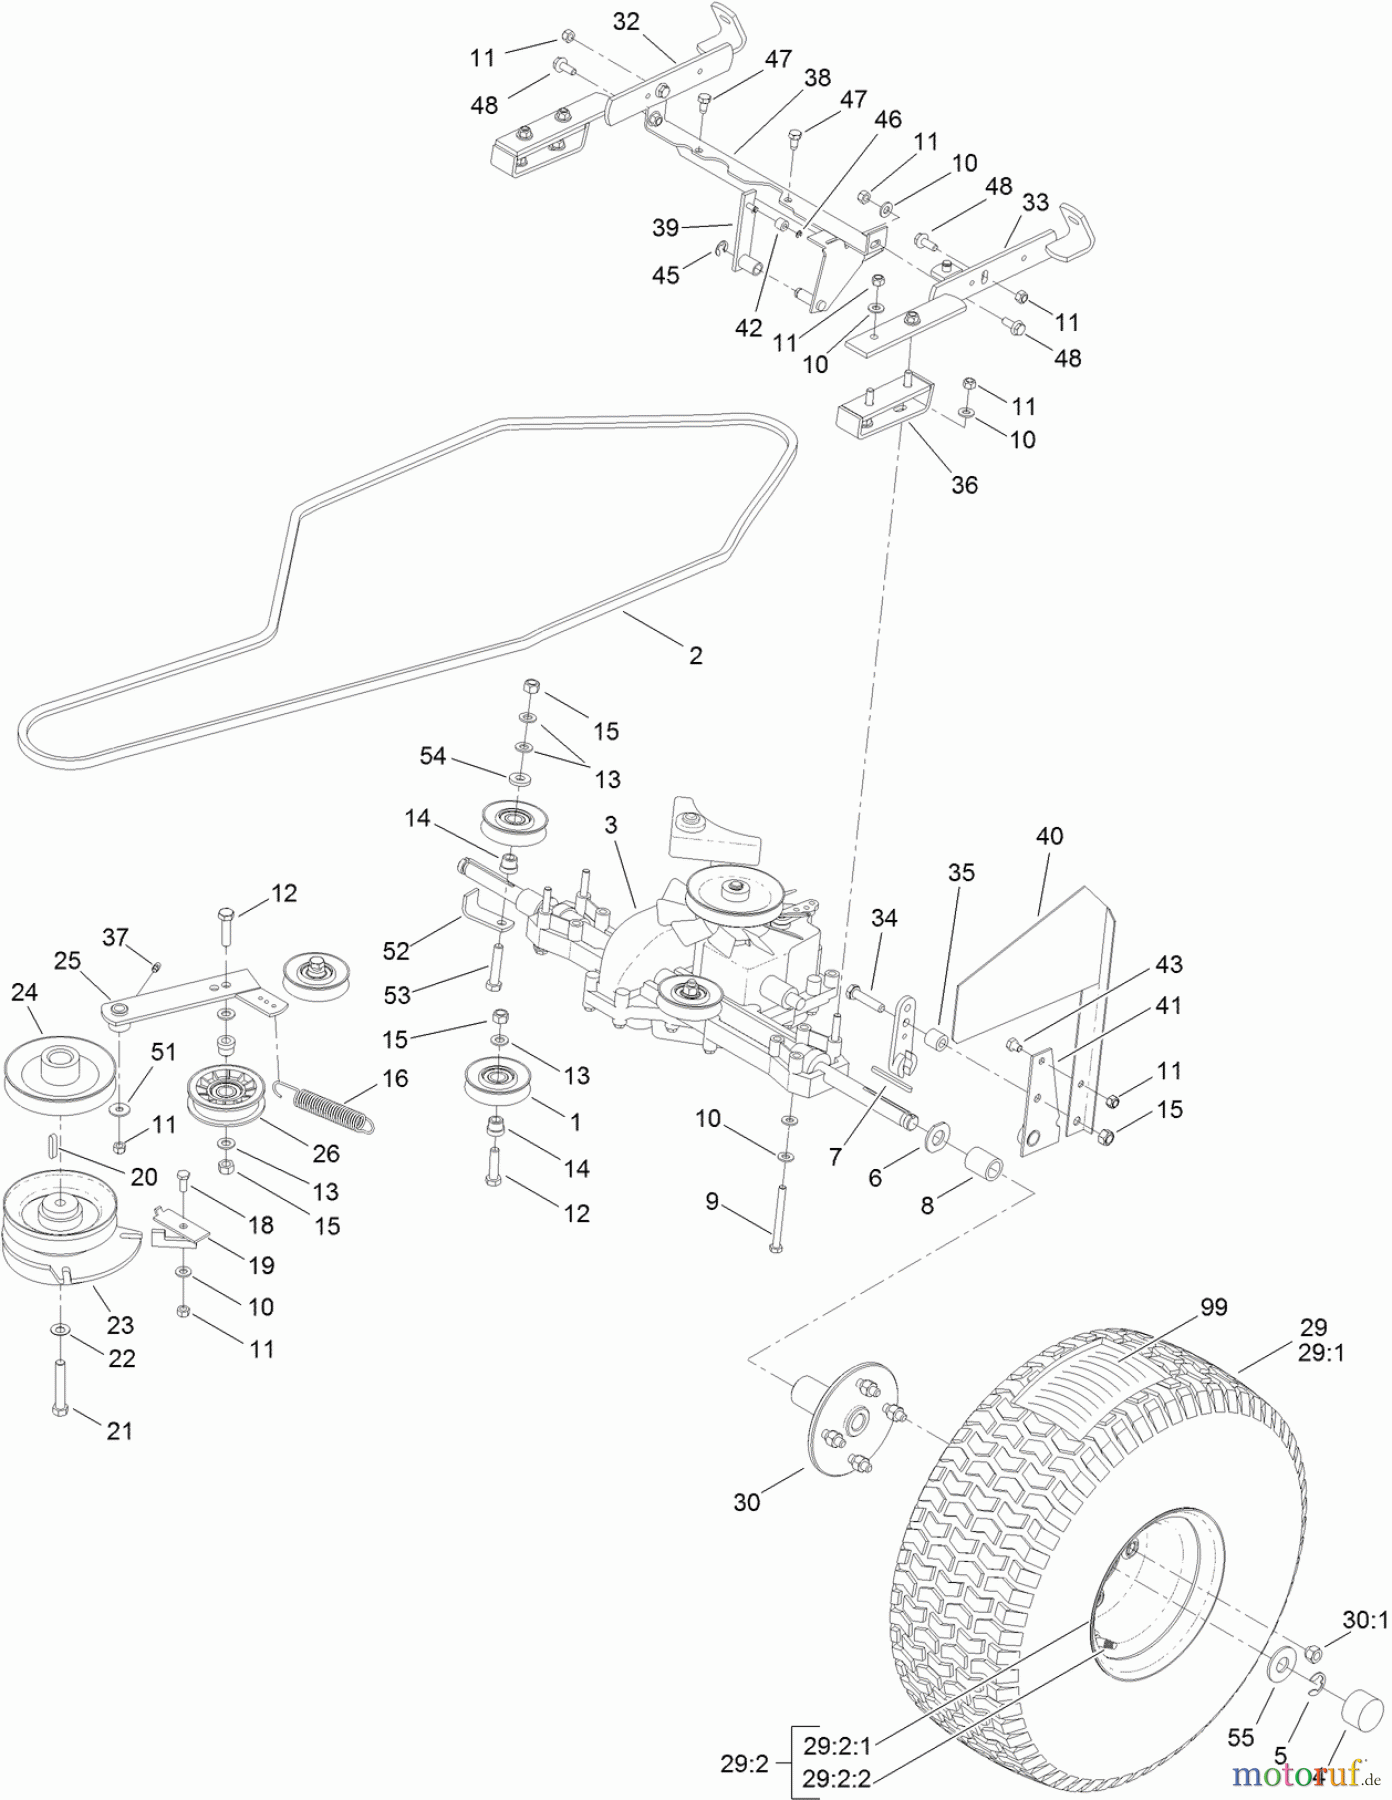  Toro Neu Mowers, Lawn & Garden Tractor Seite 1 74593 (DH 220) - Toro DH 220 Lawn Tractor, 2011 (311000001-311000400) REAR WHEEL AND TRANSAXLE ASSEMBLY